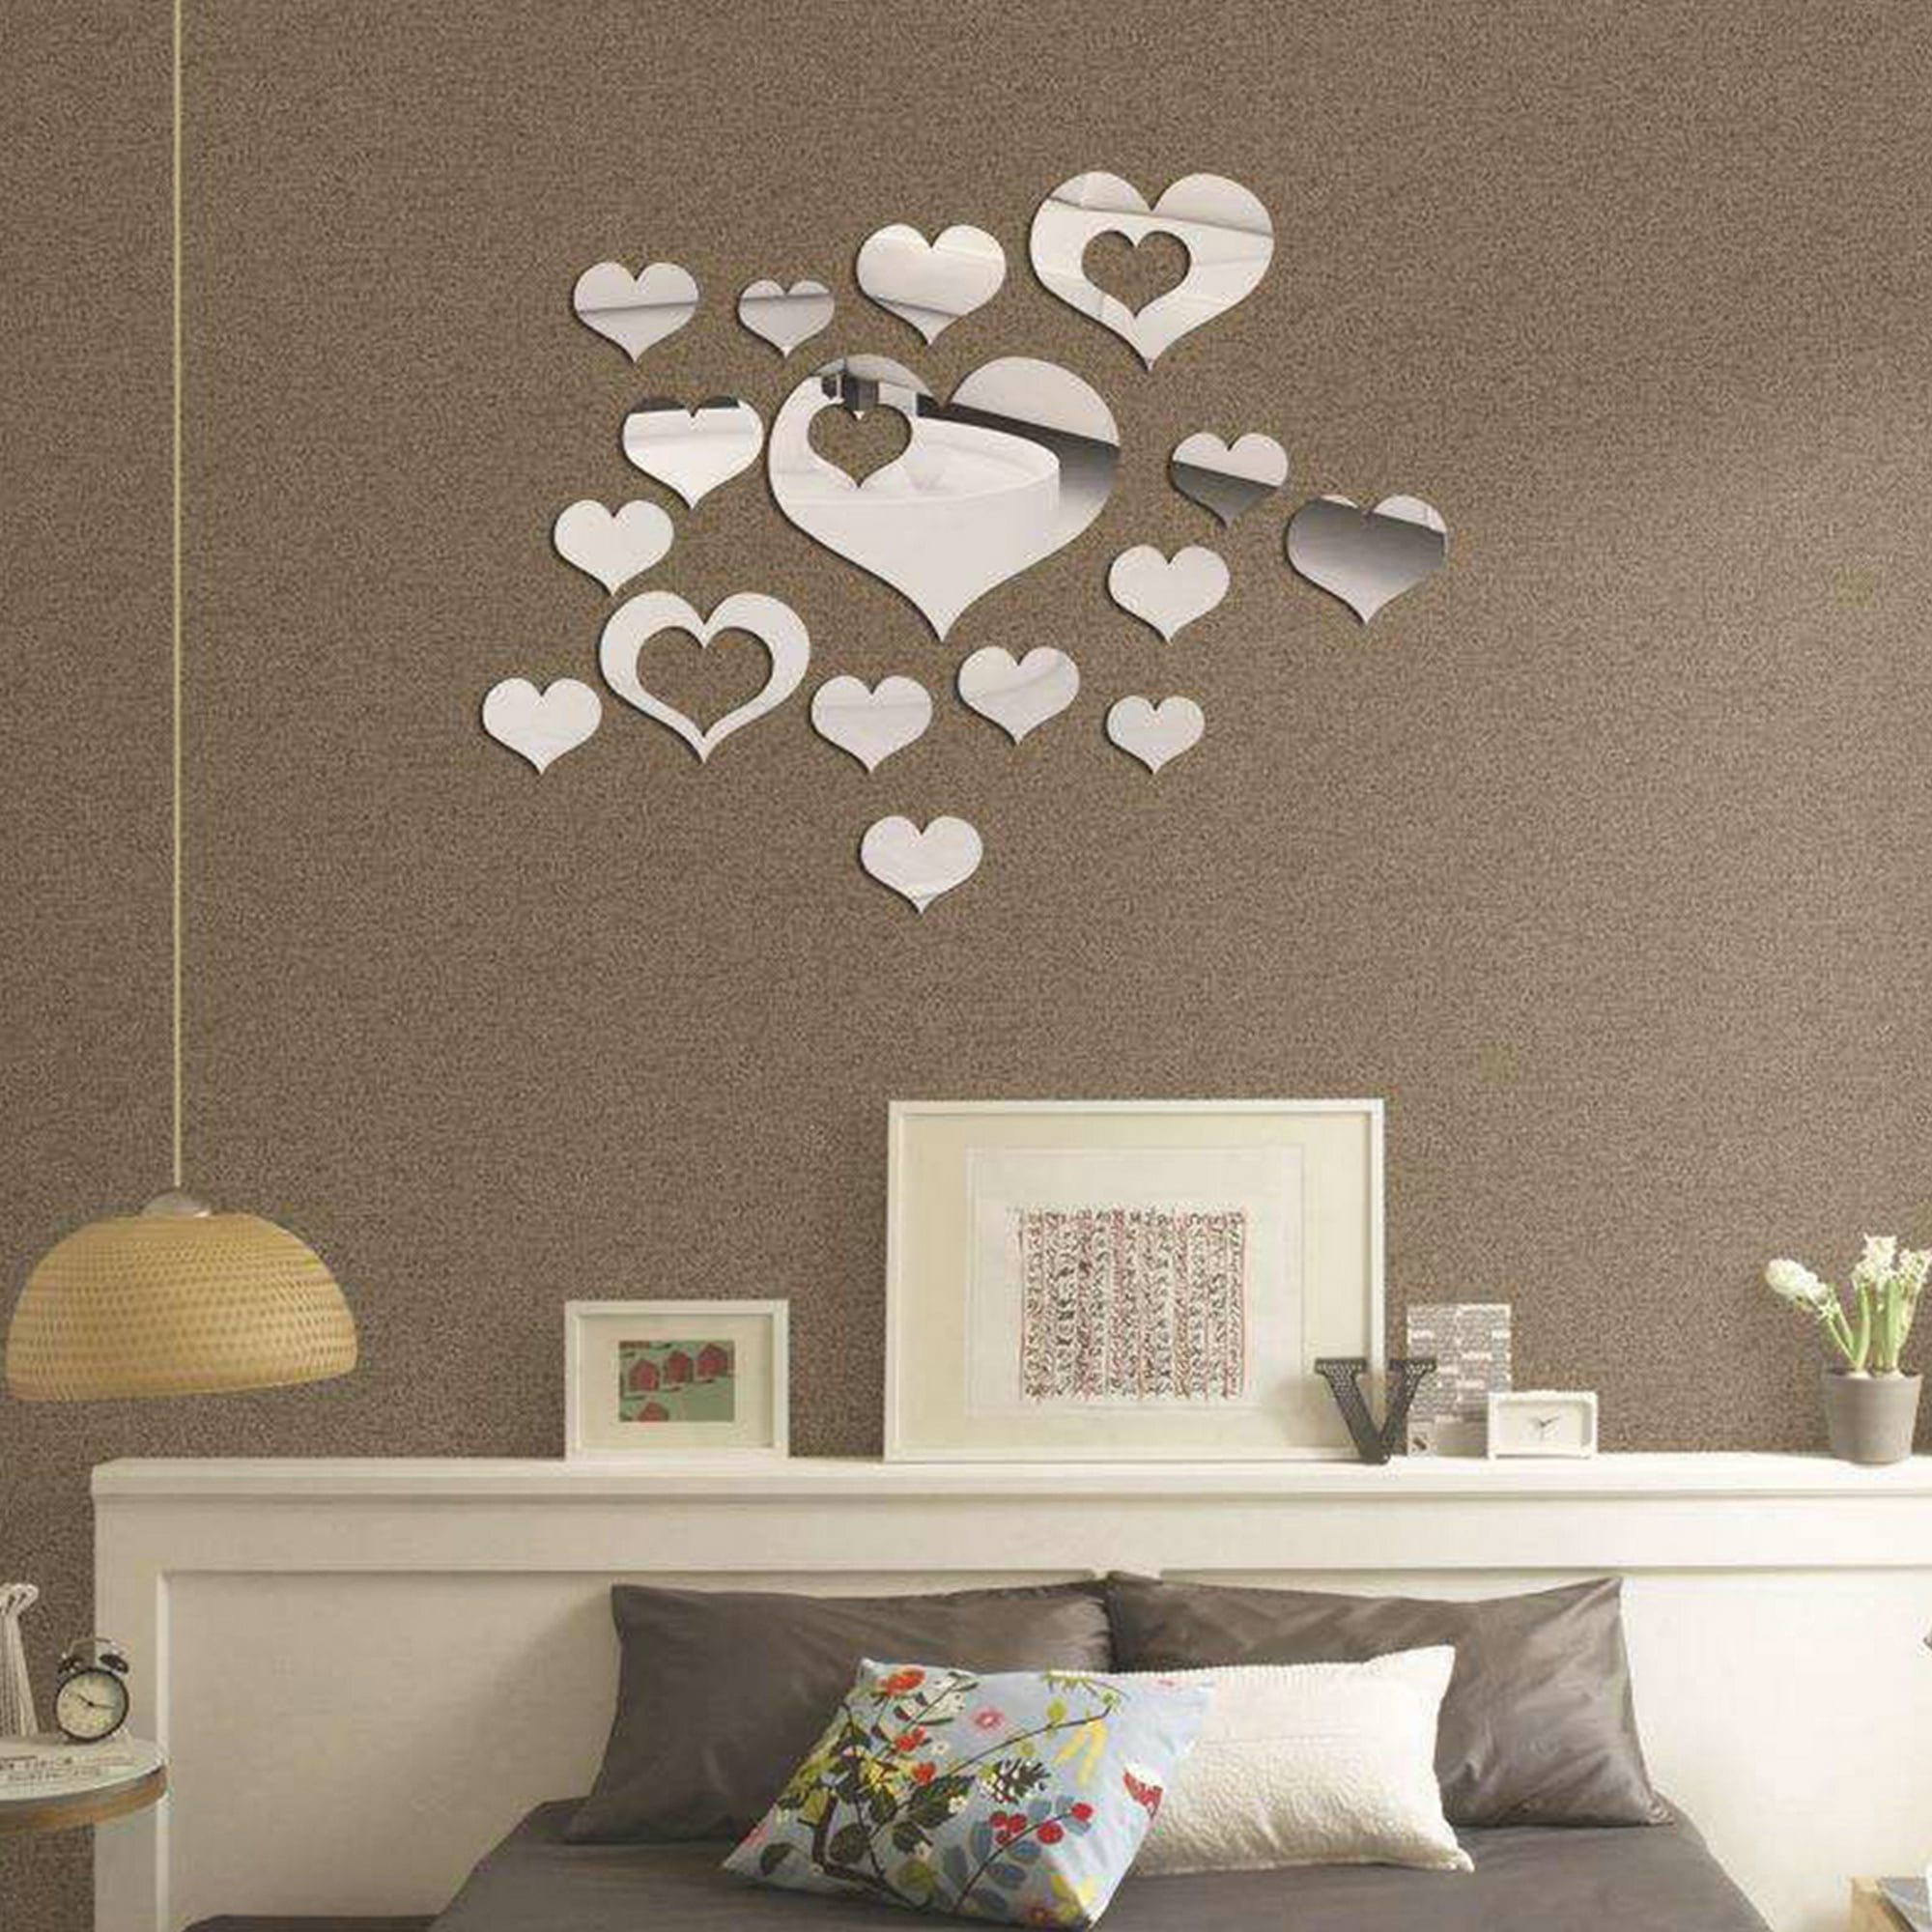 MQUPIN 3 PCS 3D Removable Mirror DIY Art Decal Decoration for Living Room,Childrens Playroom Dining Room Kitchen,etc. Gold Love Hearts Wall Stickers 